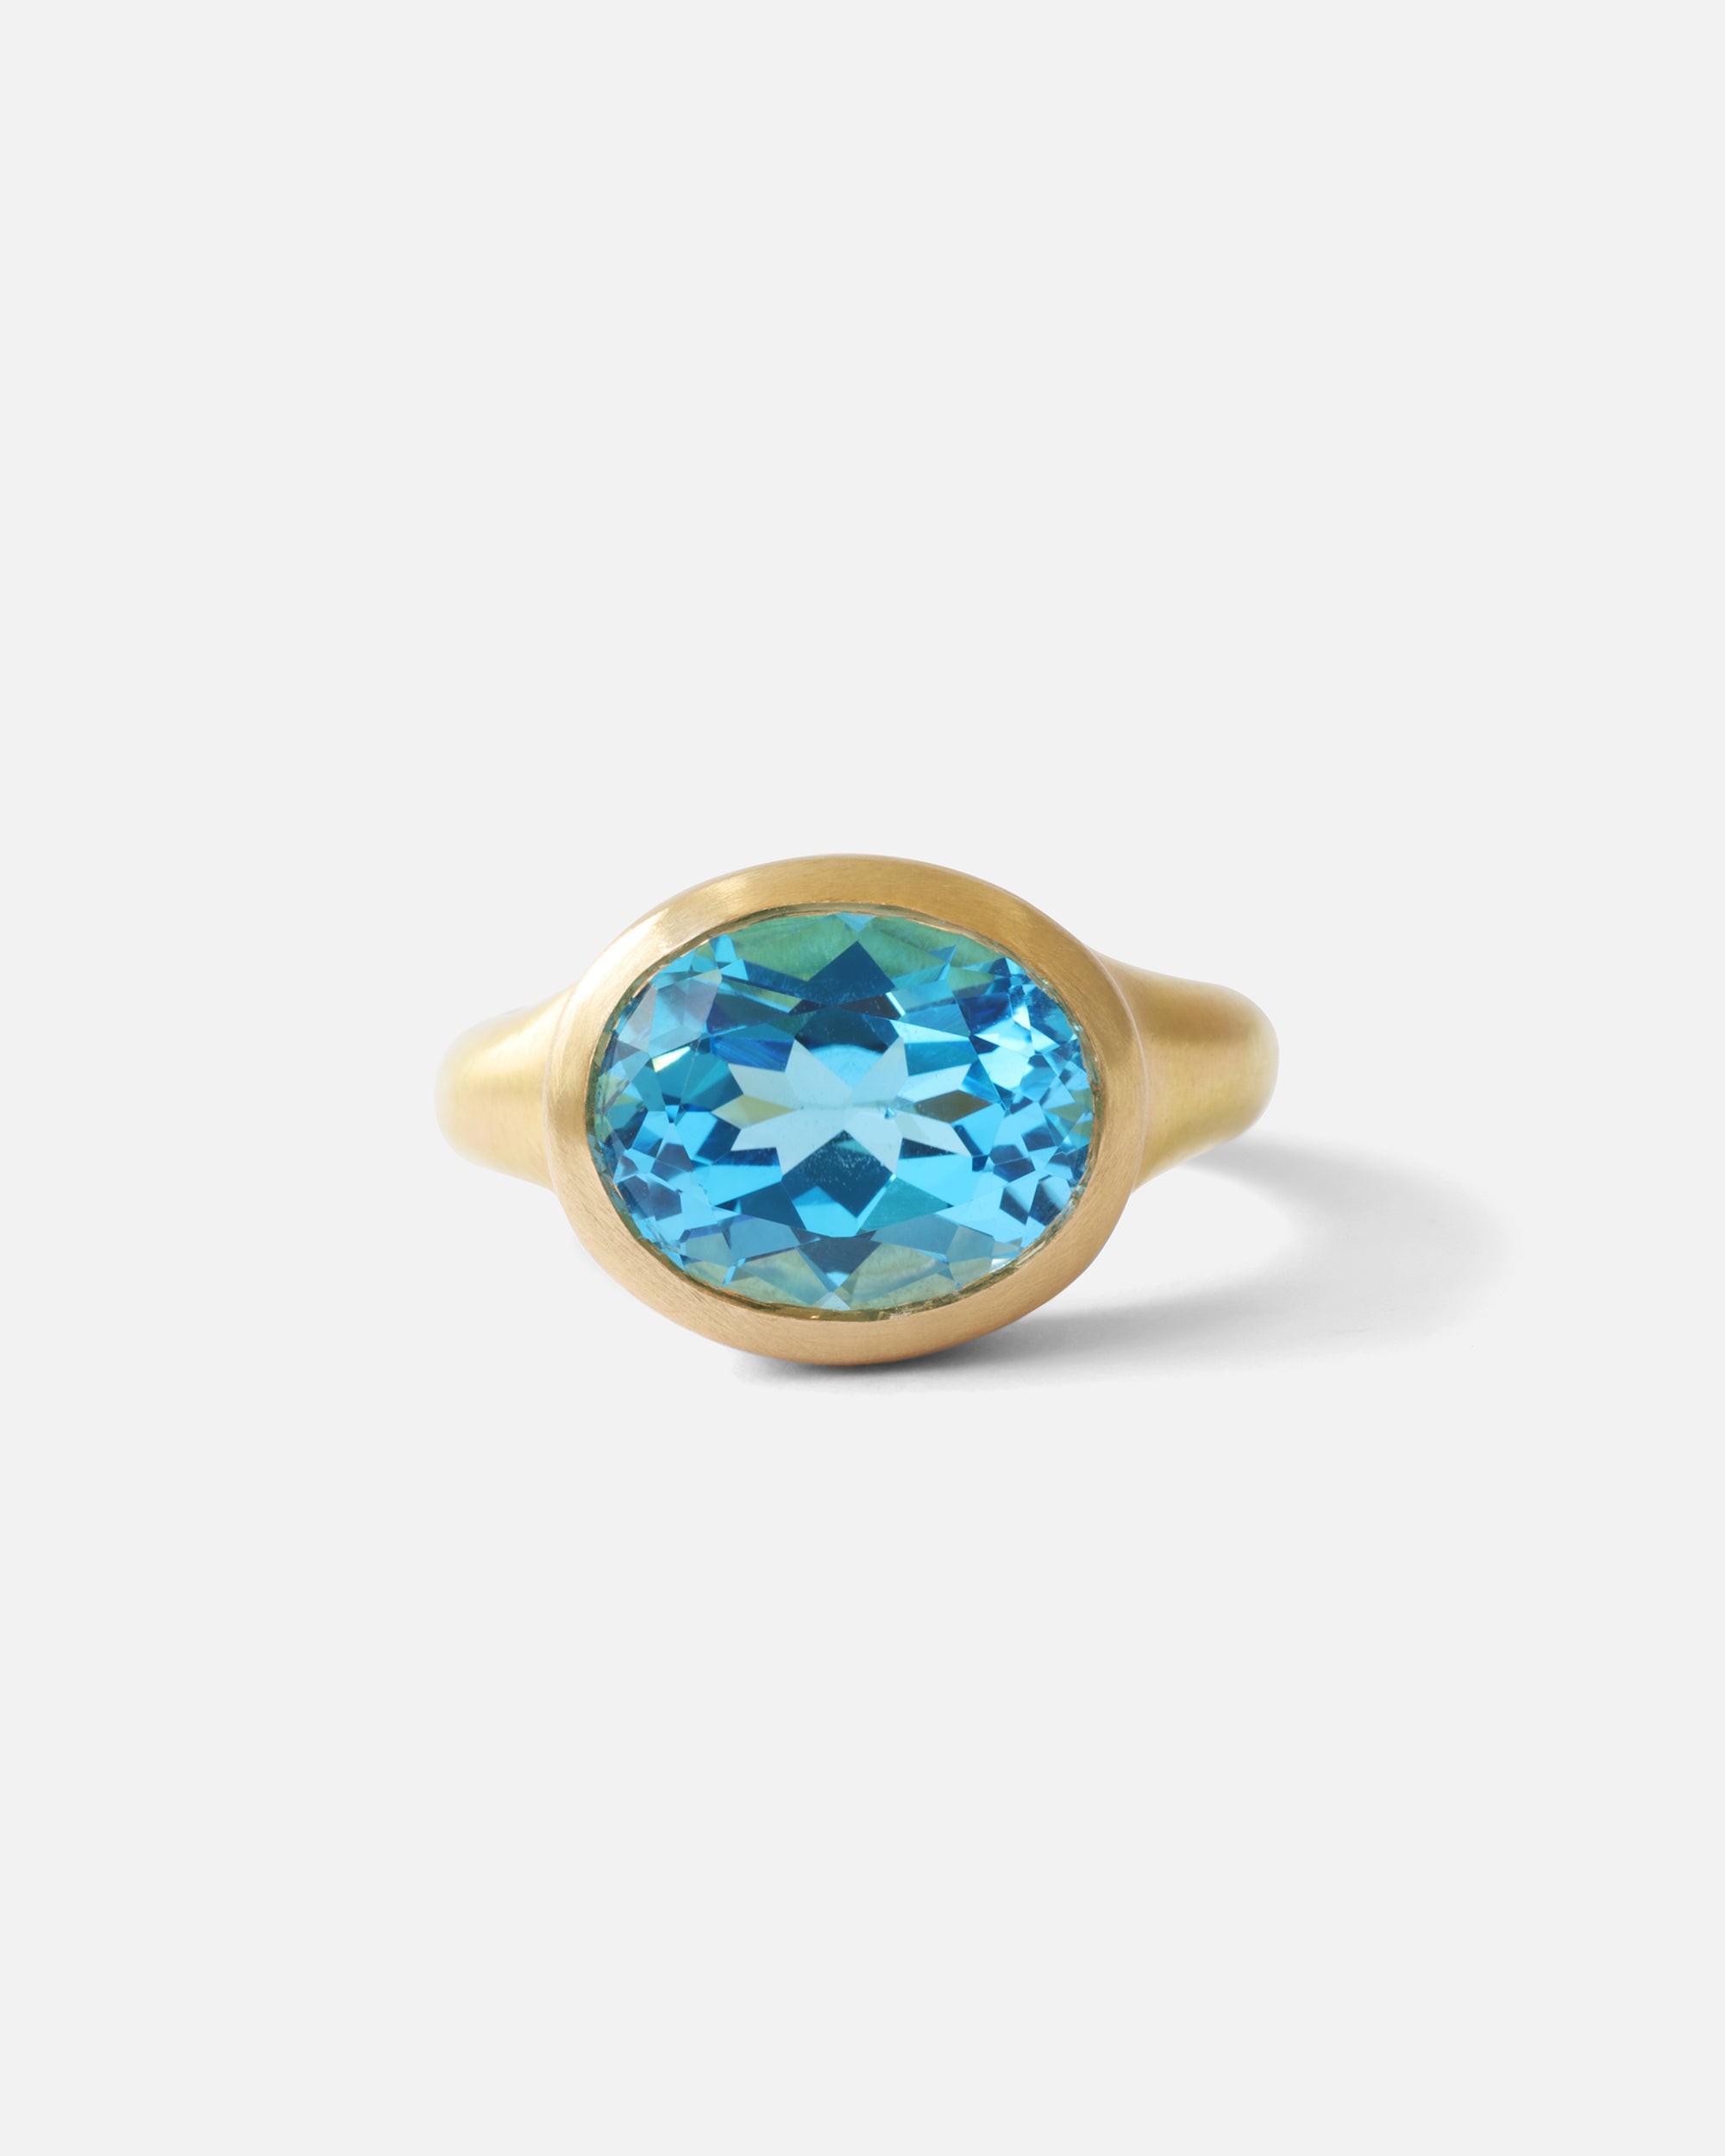 Swiss Blue Topaz Ring By Bree Altman in Engagement Rings Category